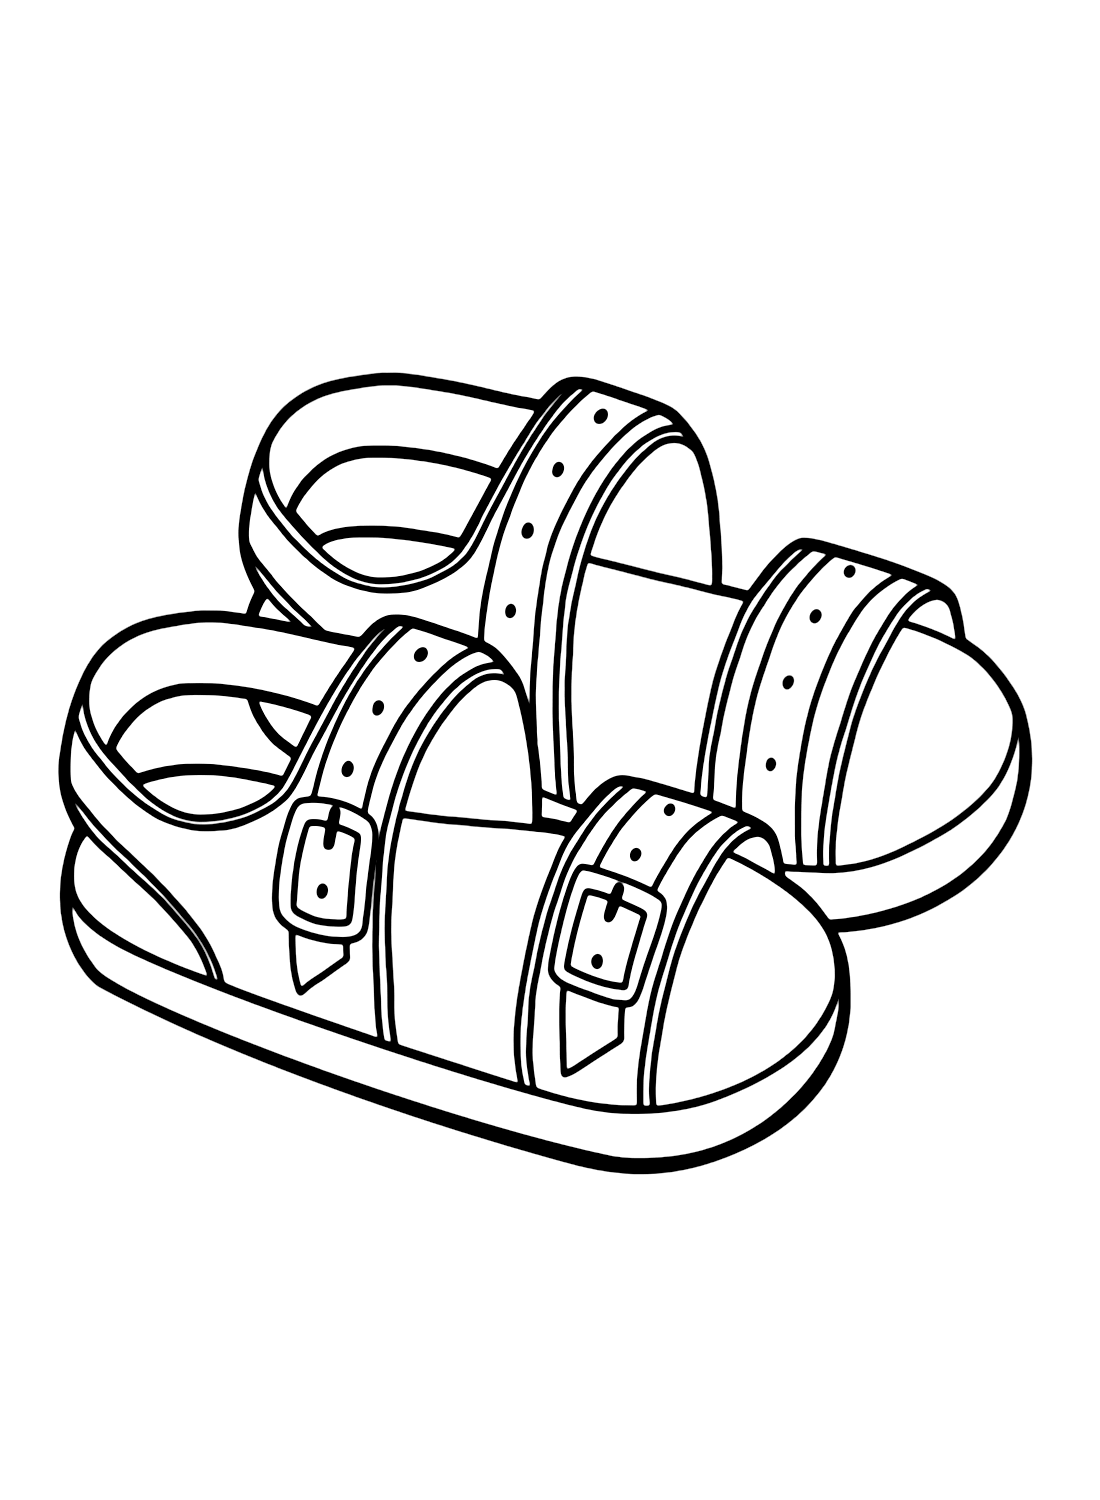 Sandals Free Coloring Page